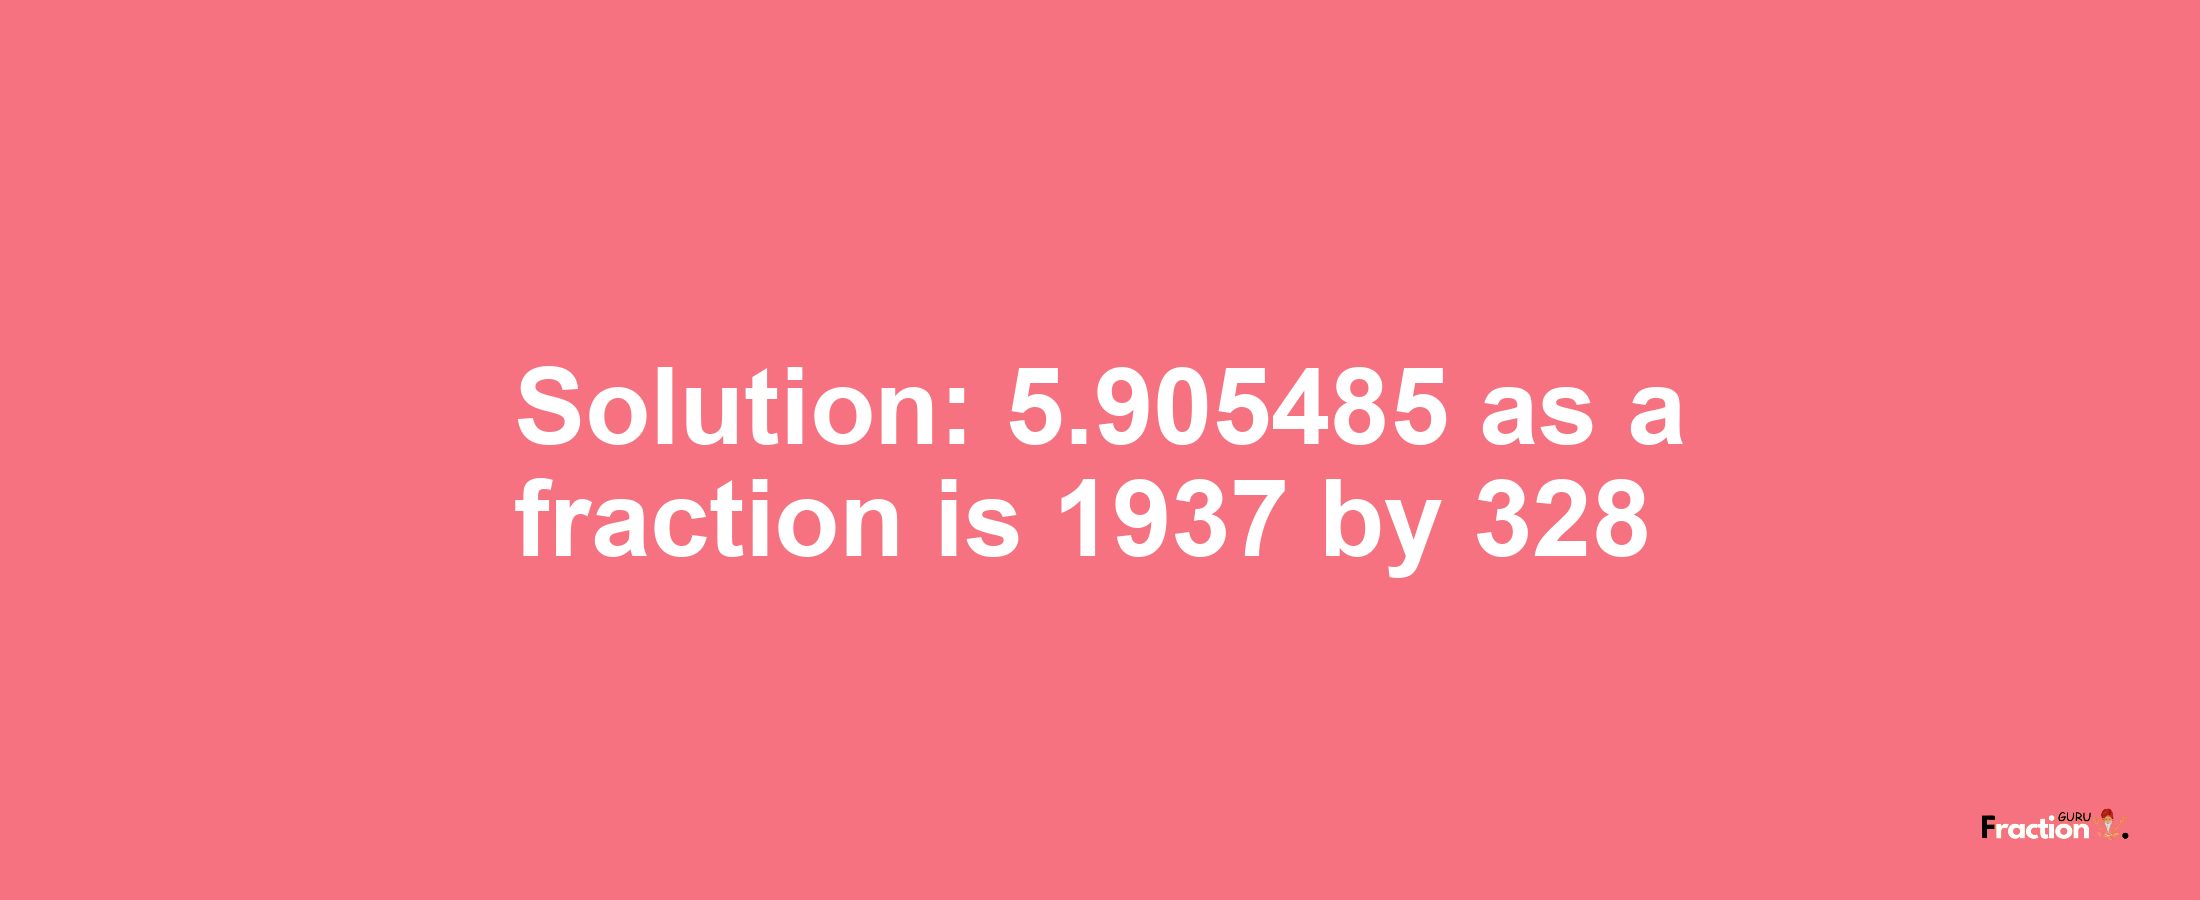 Solution:5.905485 as a fraction is 1937/328